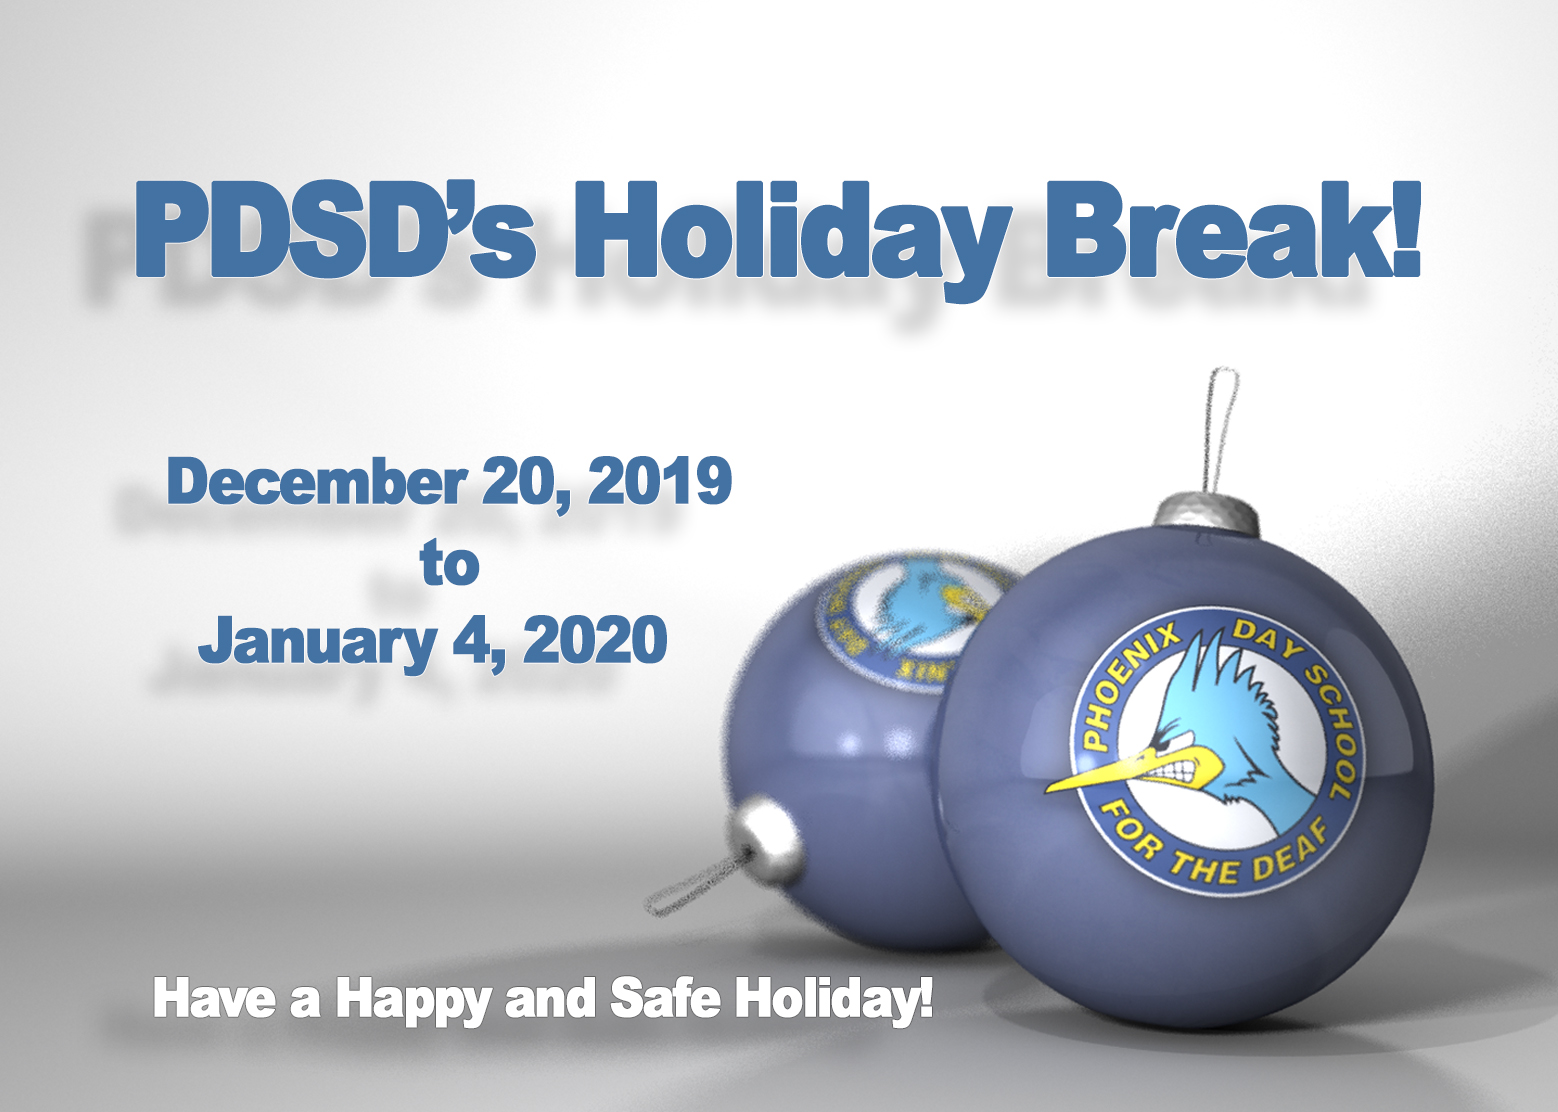 PDSD's Holiday Break! December 20, 2019 to January 4, 2020. Have a Happy and Safe Holiday!